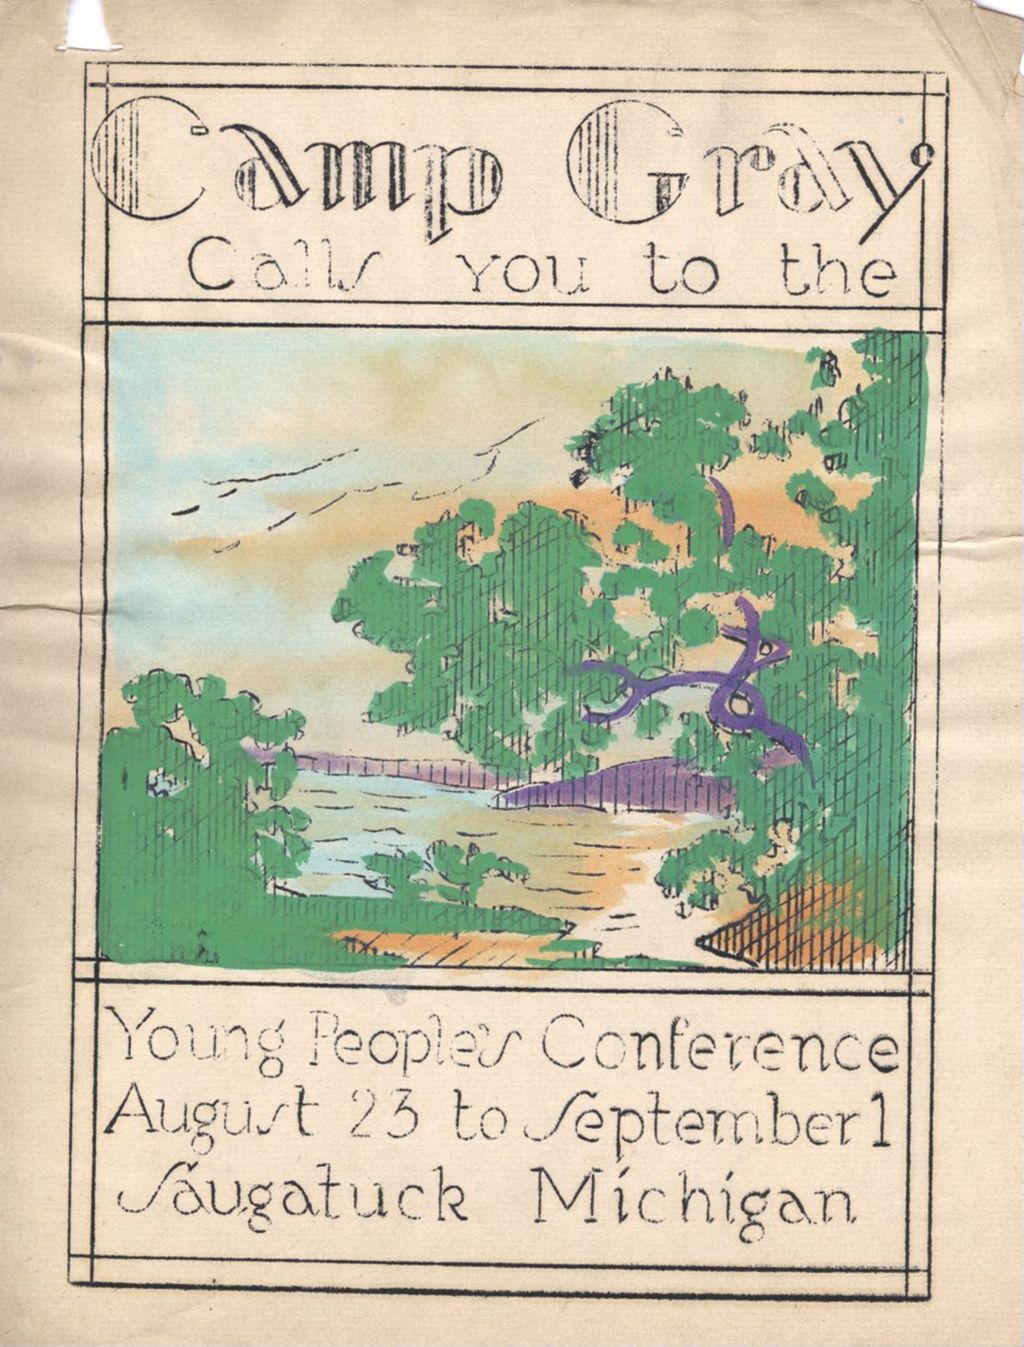 Flyer announcing Young People's Conference at Camp Gray